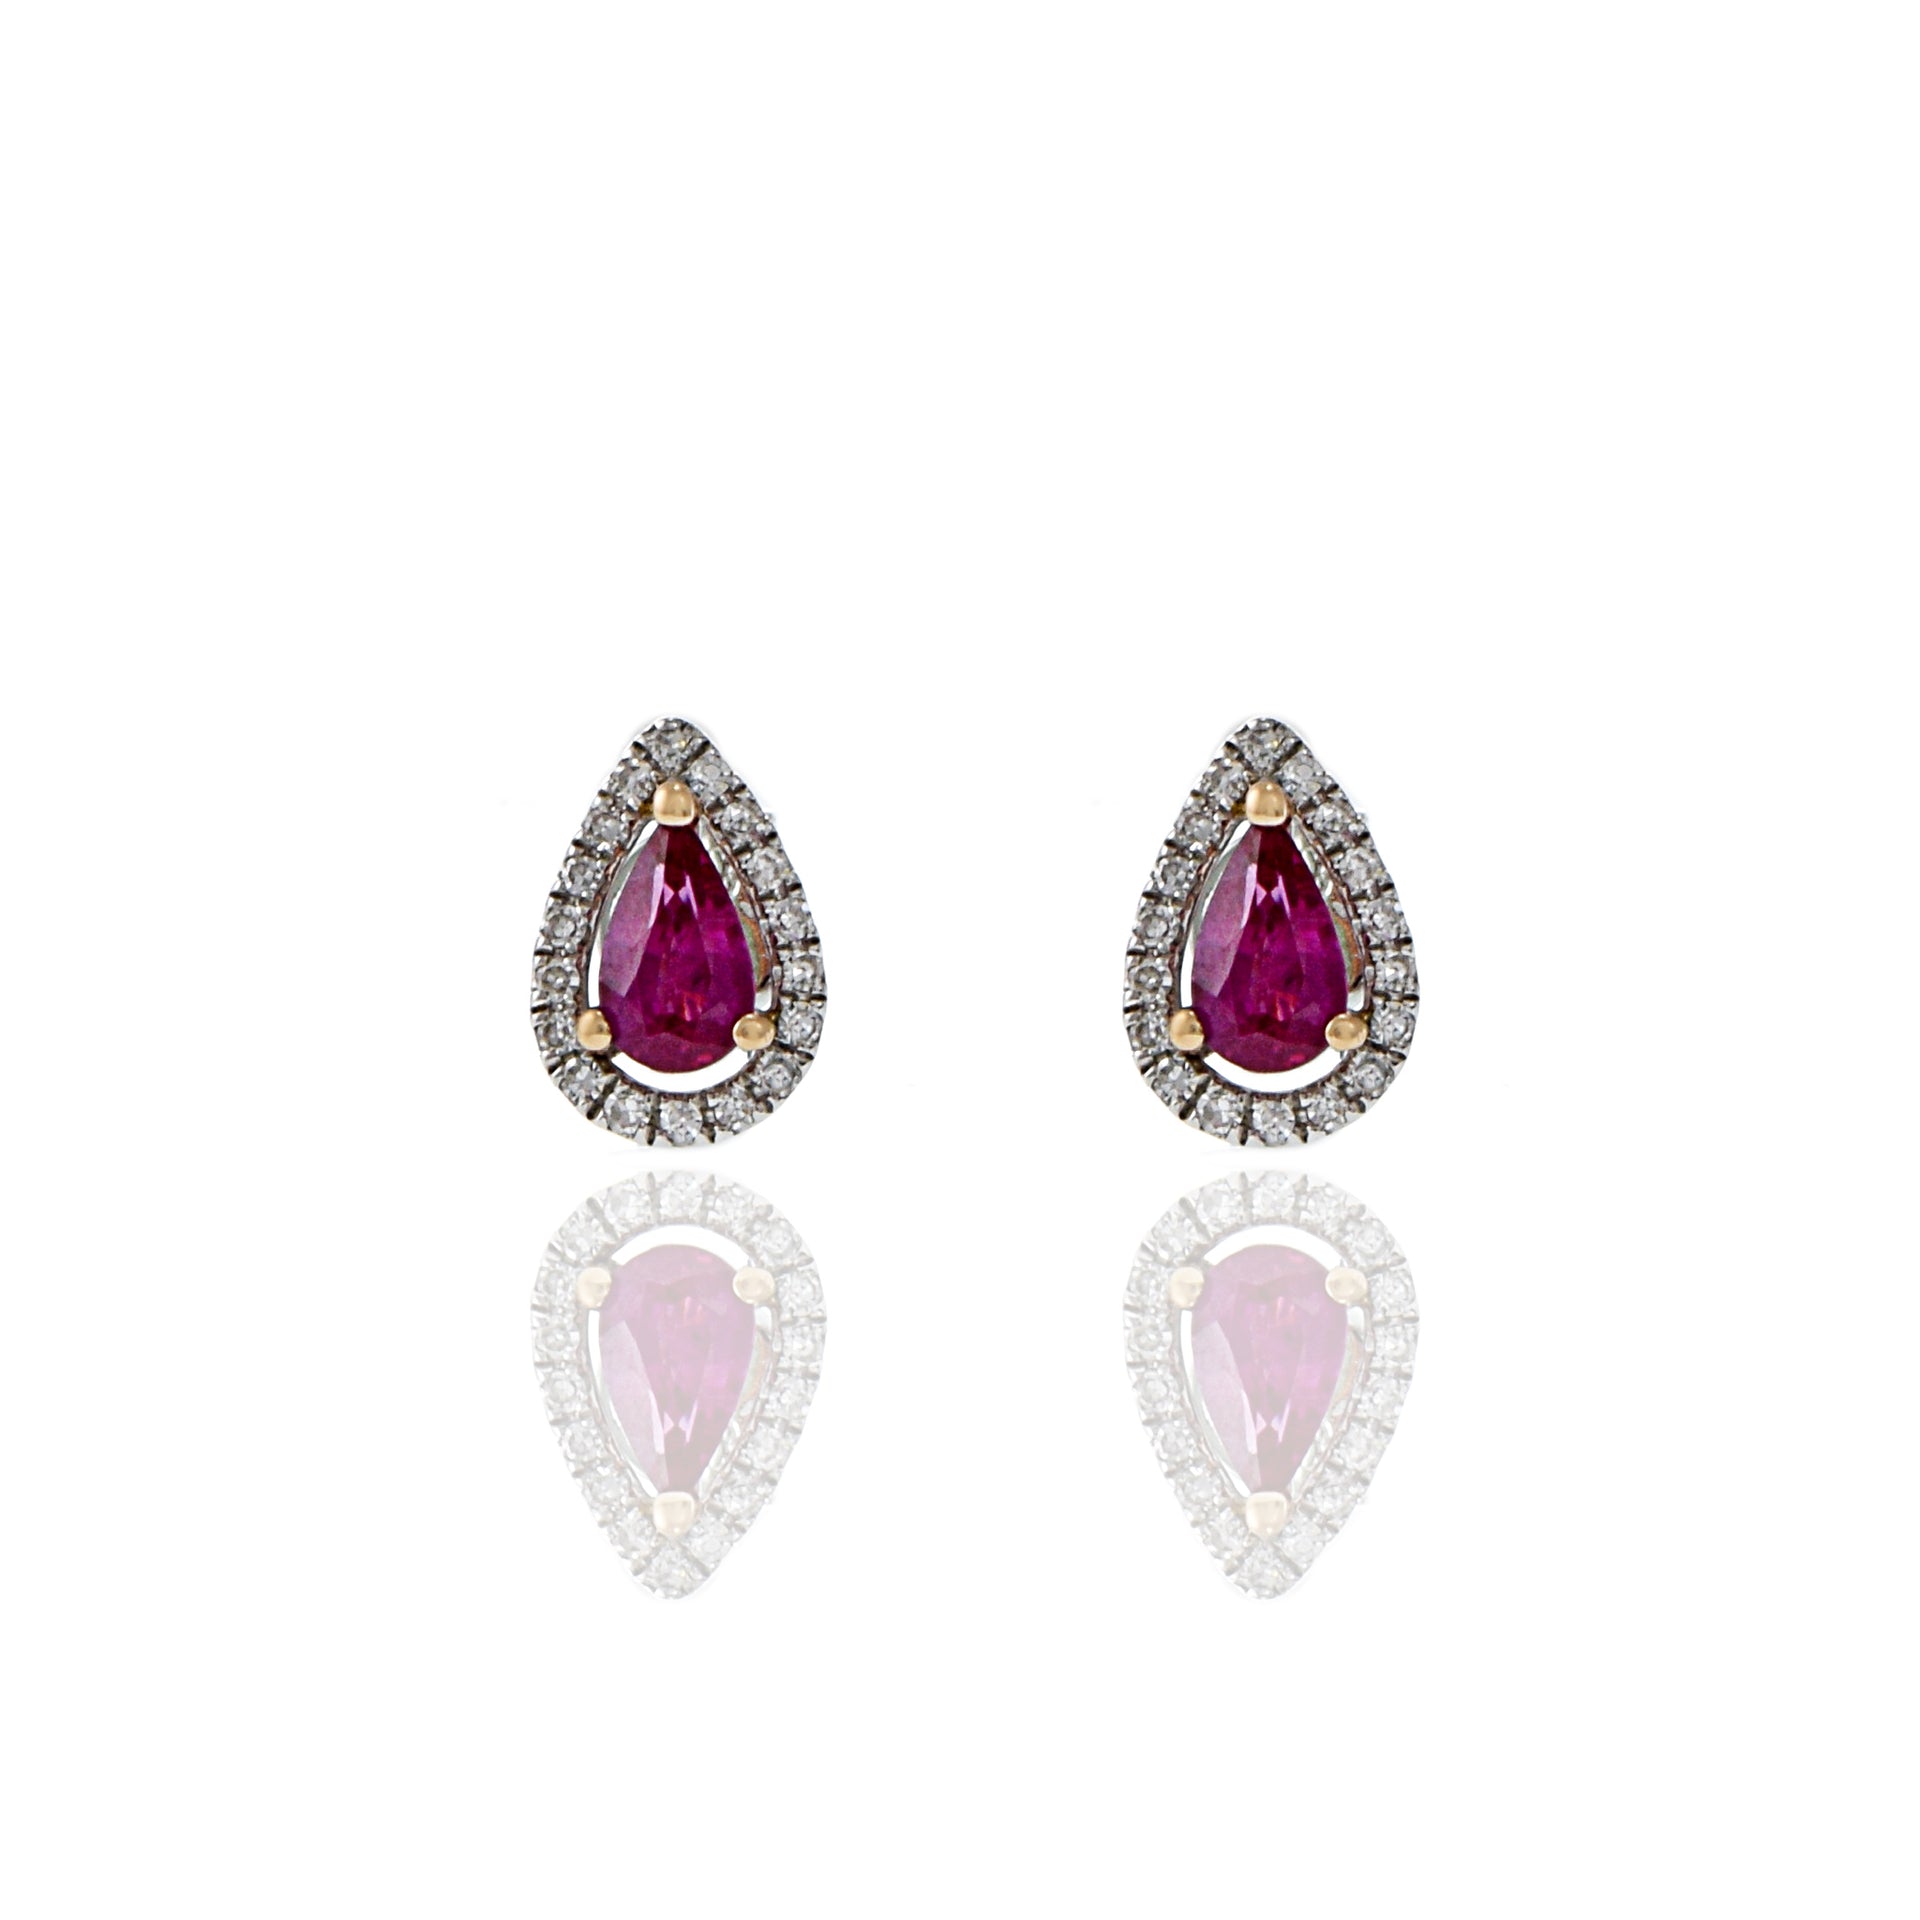 14KT White Gold Ruby And Diamond Earrings